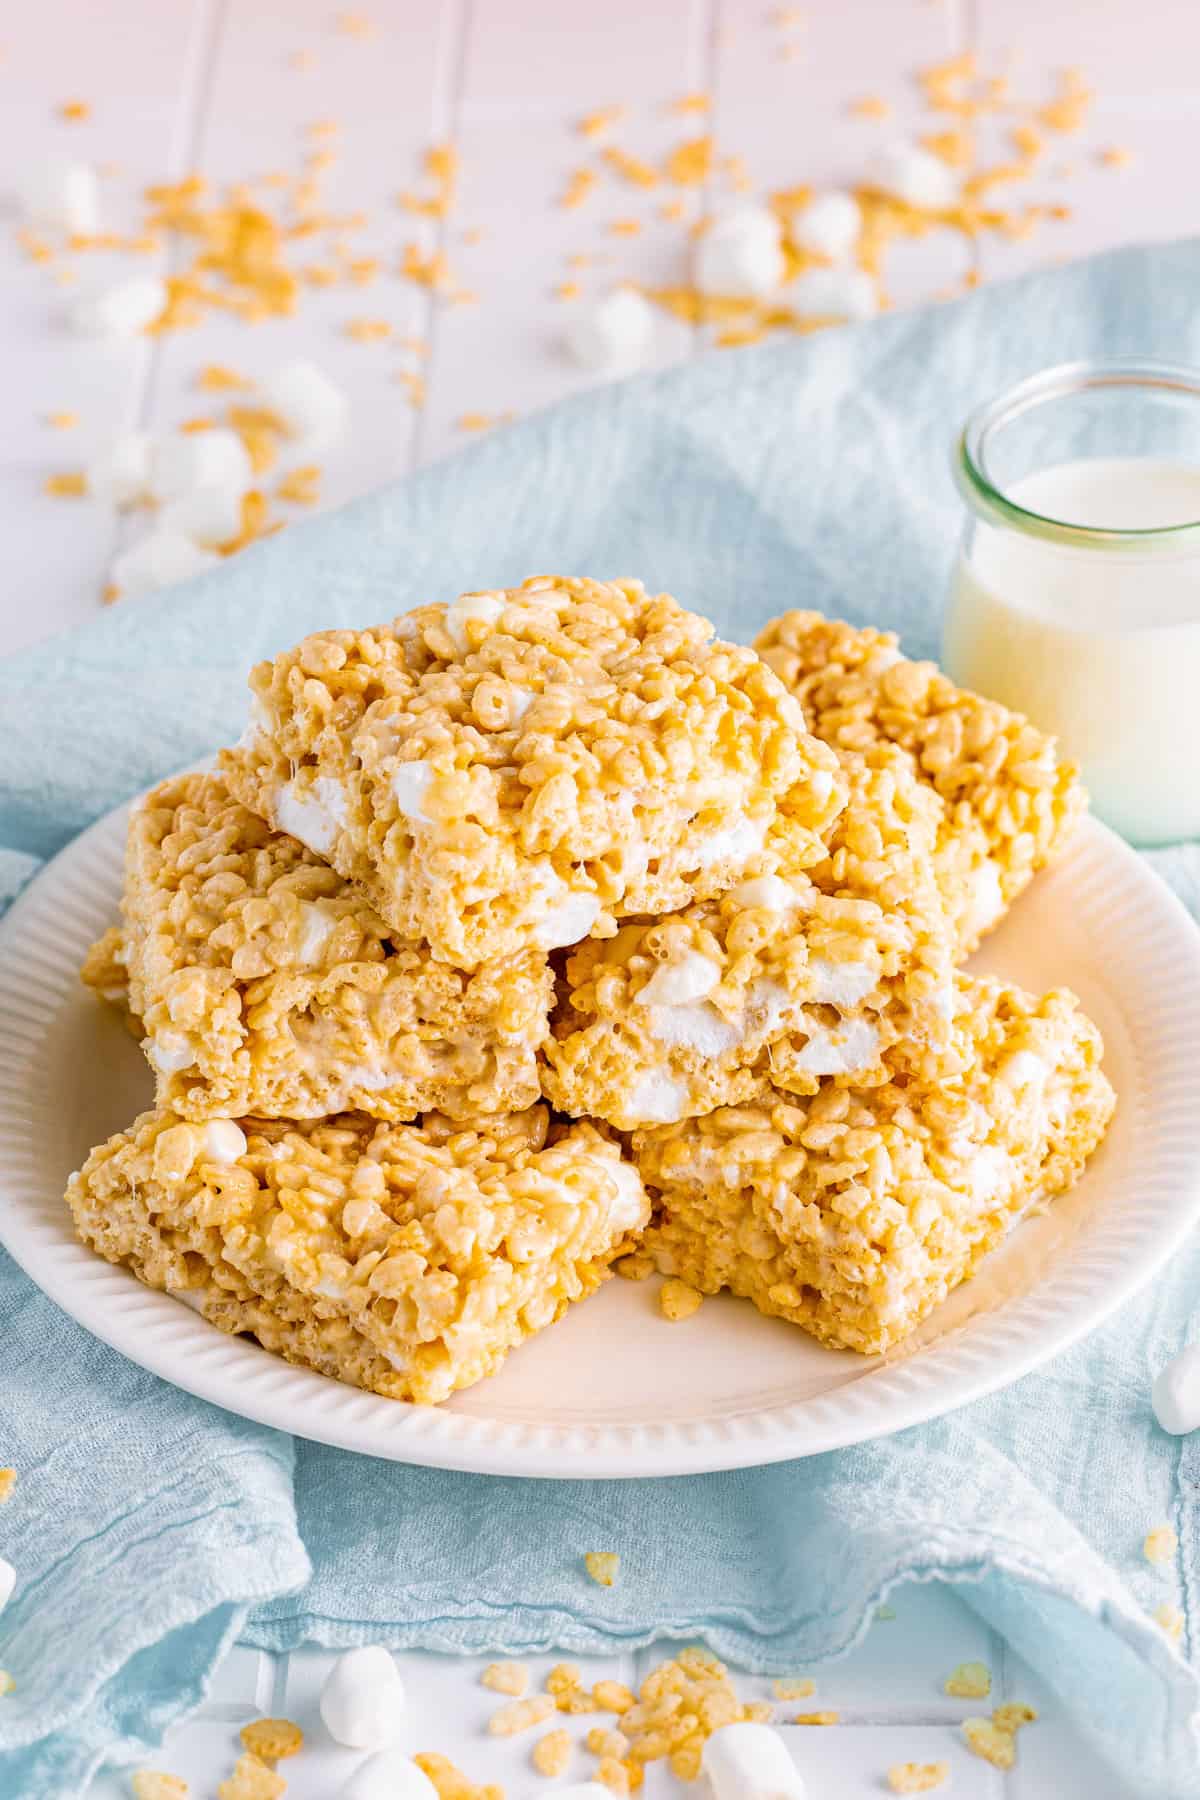 Thick Rice Krispies Treats stacked on white plate with glass of milk in backgroud.